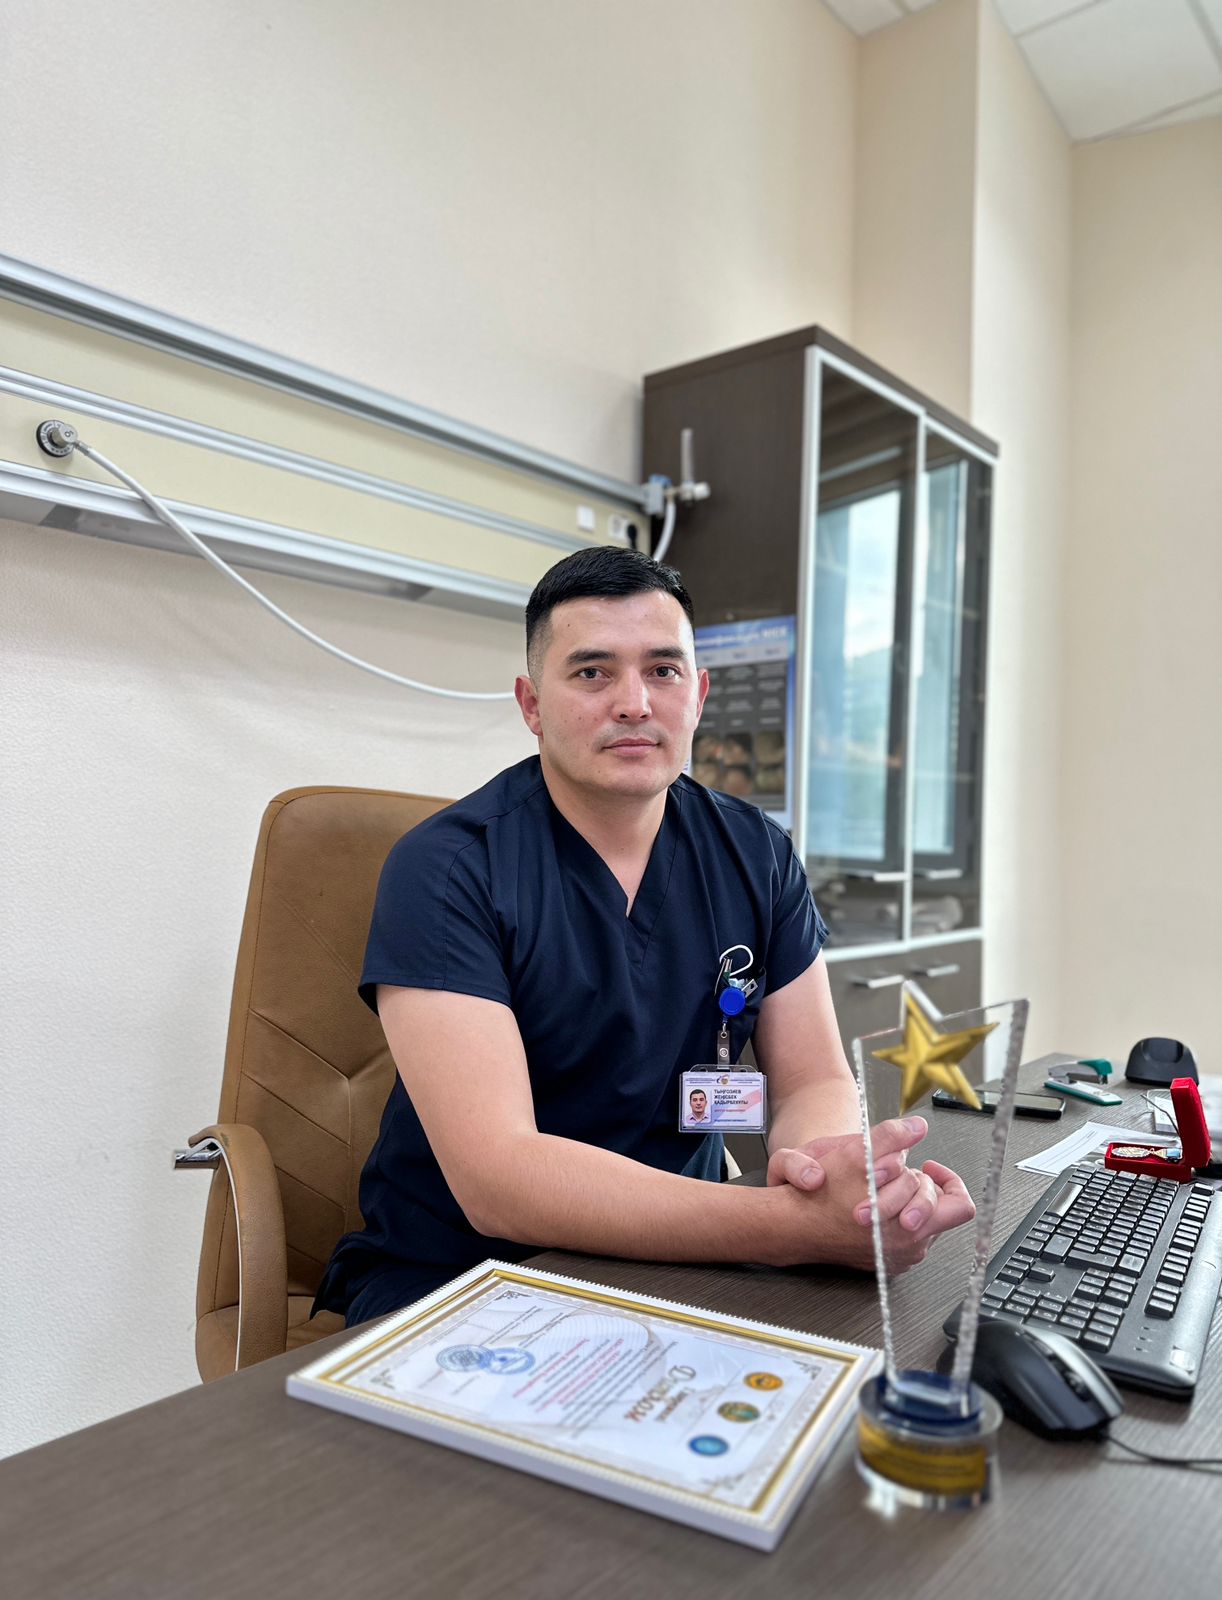 Zhenisbek Tyngoziyev, an endoscopist of Medical Center Hospital of the President’s Affairs Administration of the Republic of Kazakhstan, was honored with a high award in the field of health care